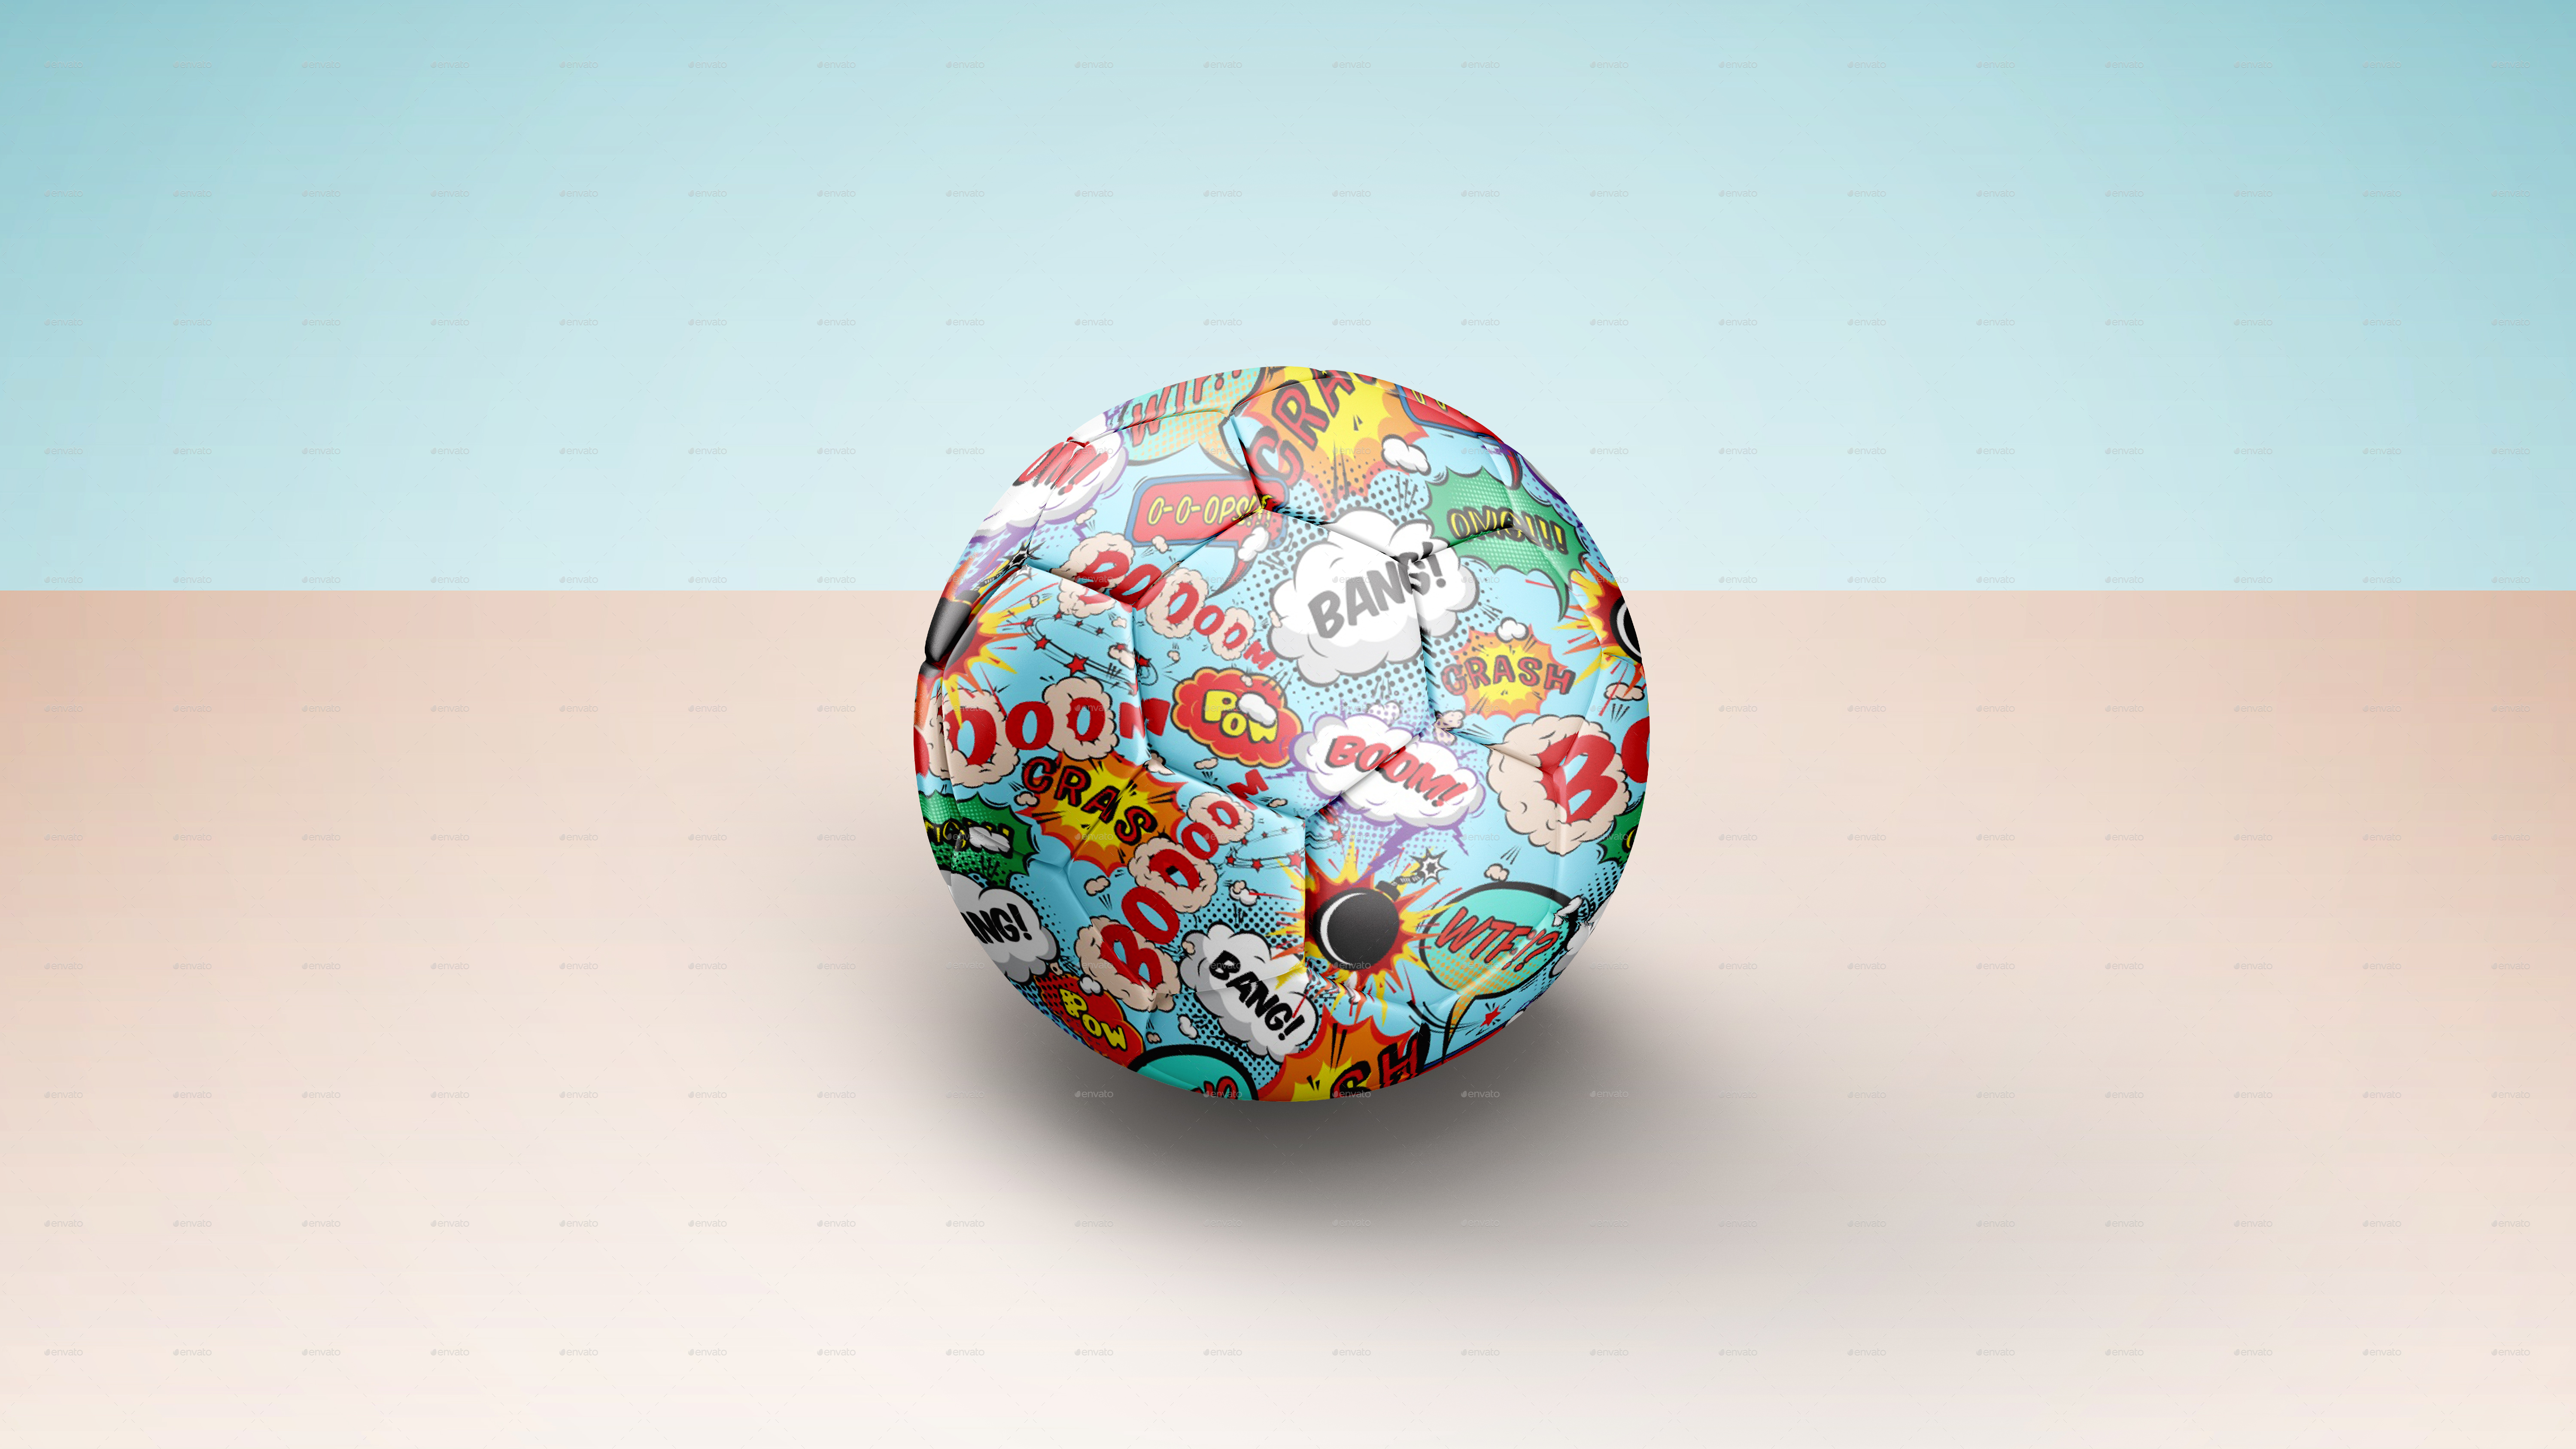 Download Soccer / Football Ball Mockup by graphicdesigno | GraphicRiver